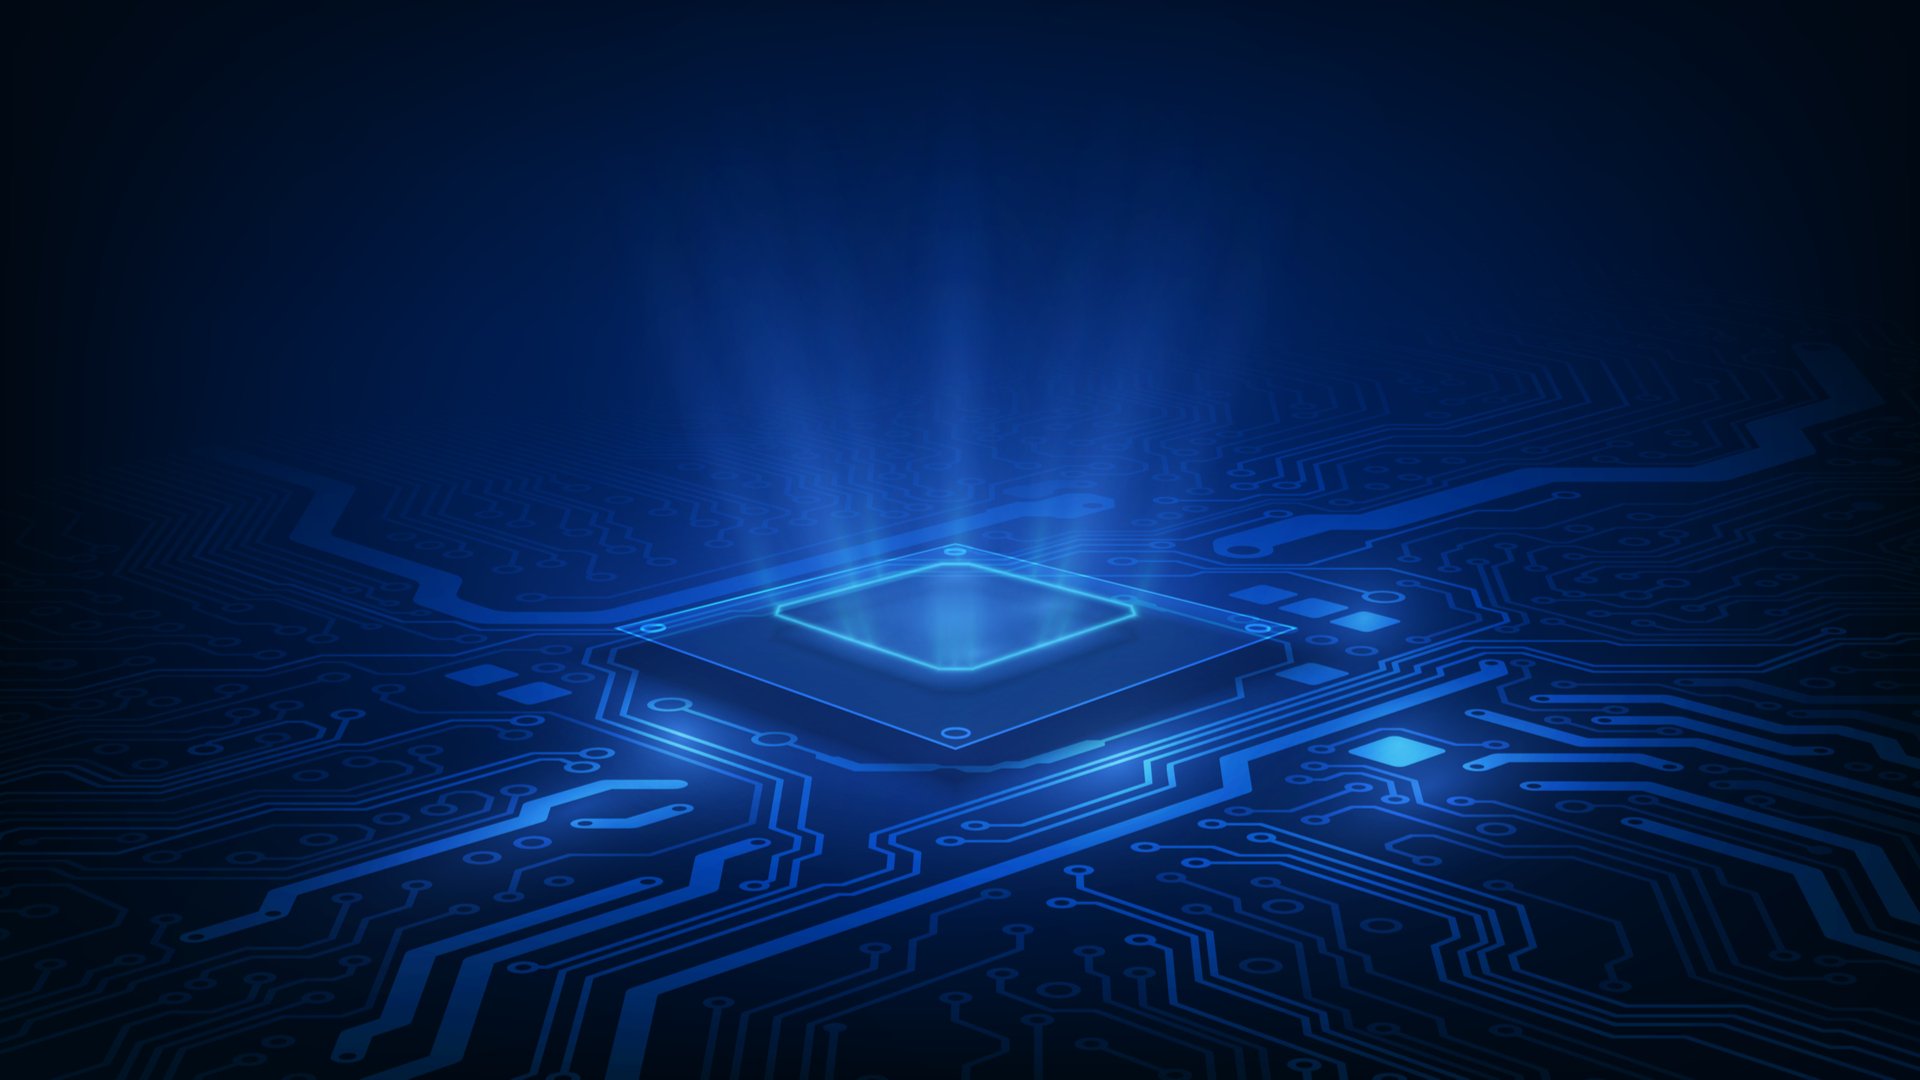 Illustration of circuit board chip processor background